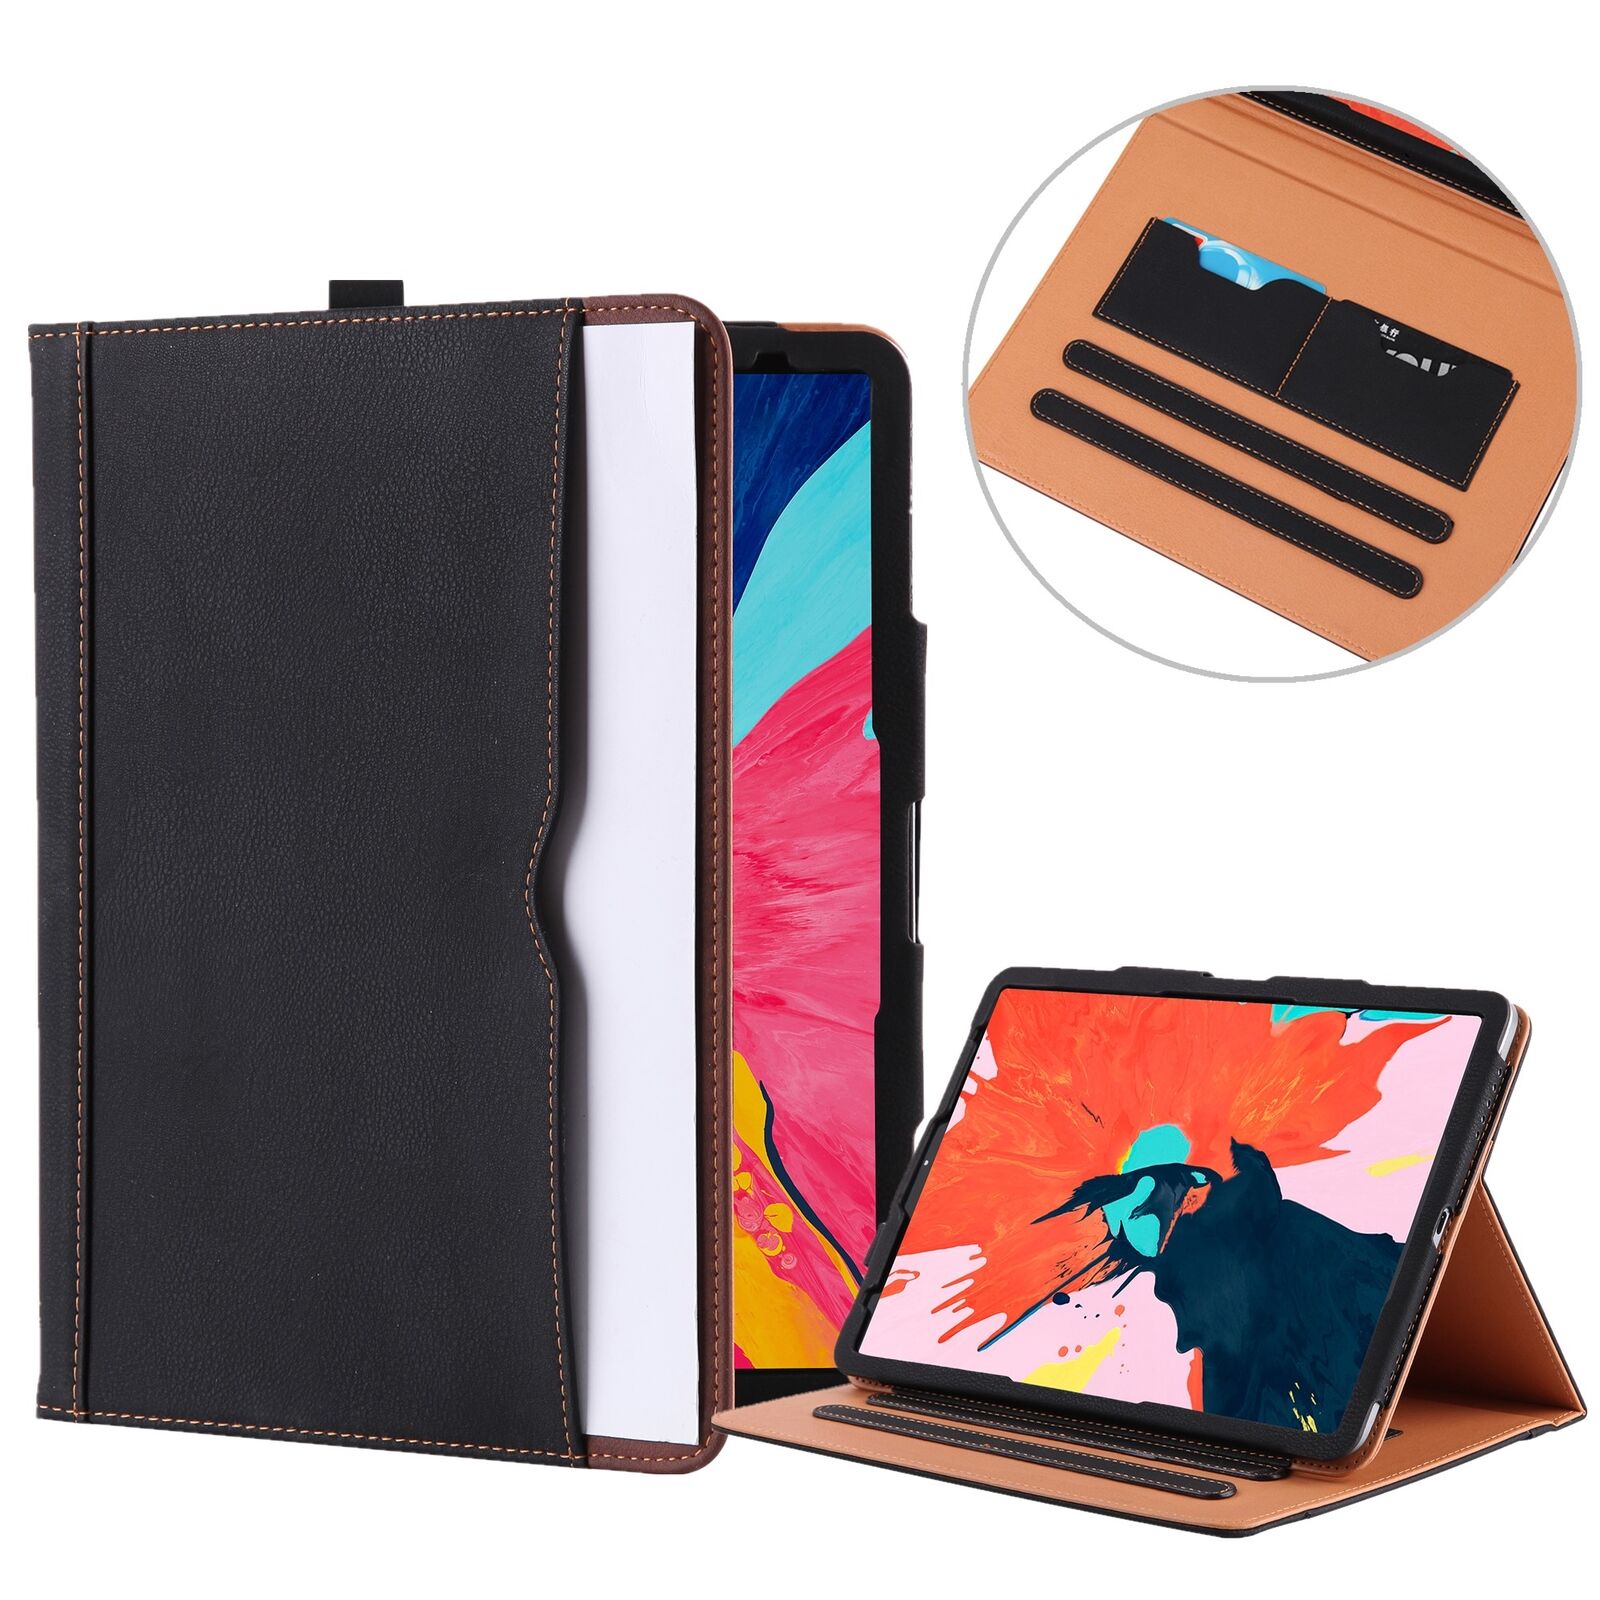 New Soft Leather Smart Cover Case Sleep Wake For Apple iPad Pro 11 Inch 2018